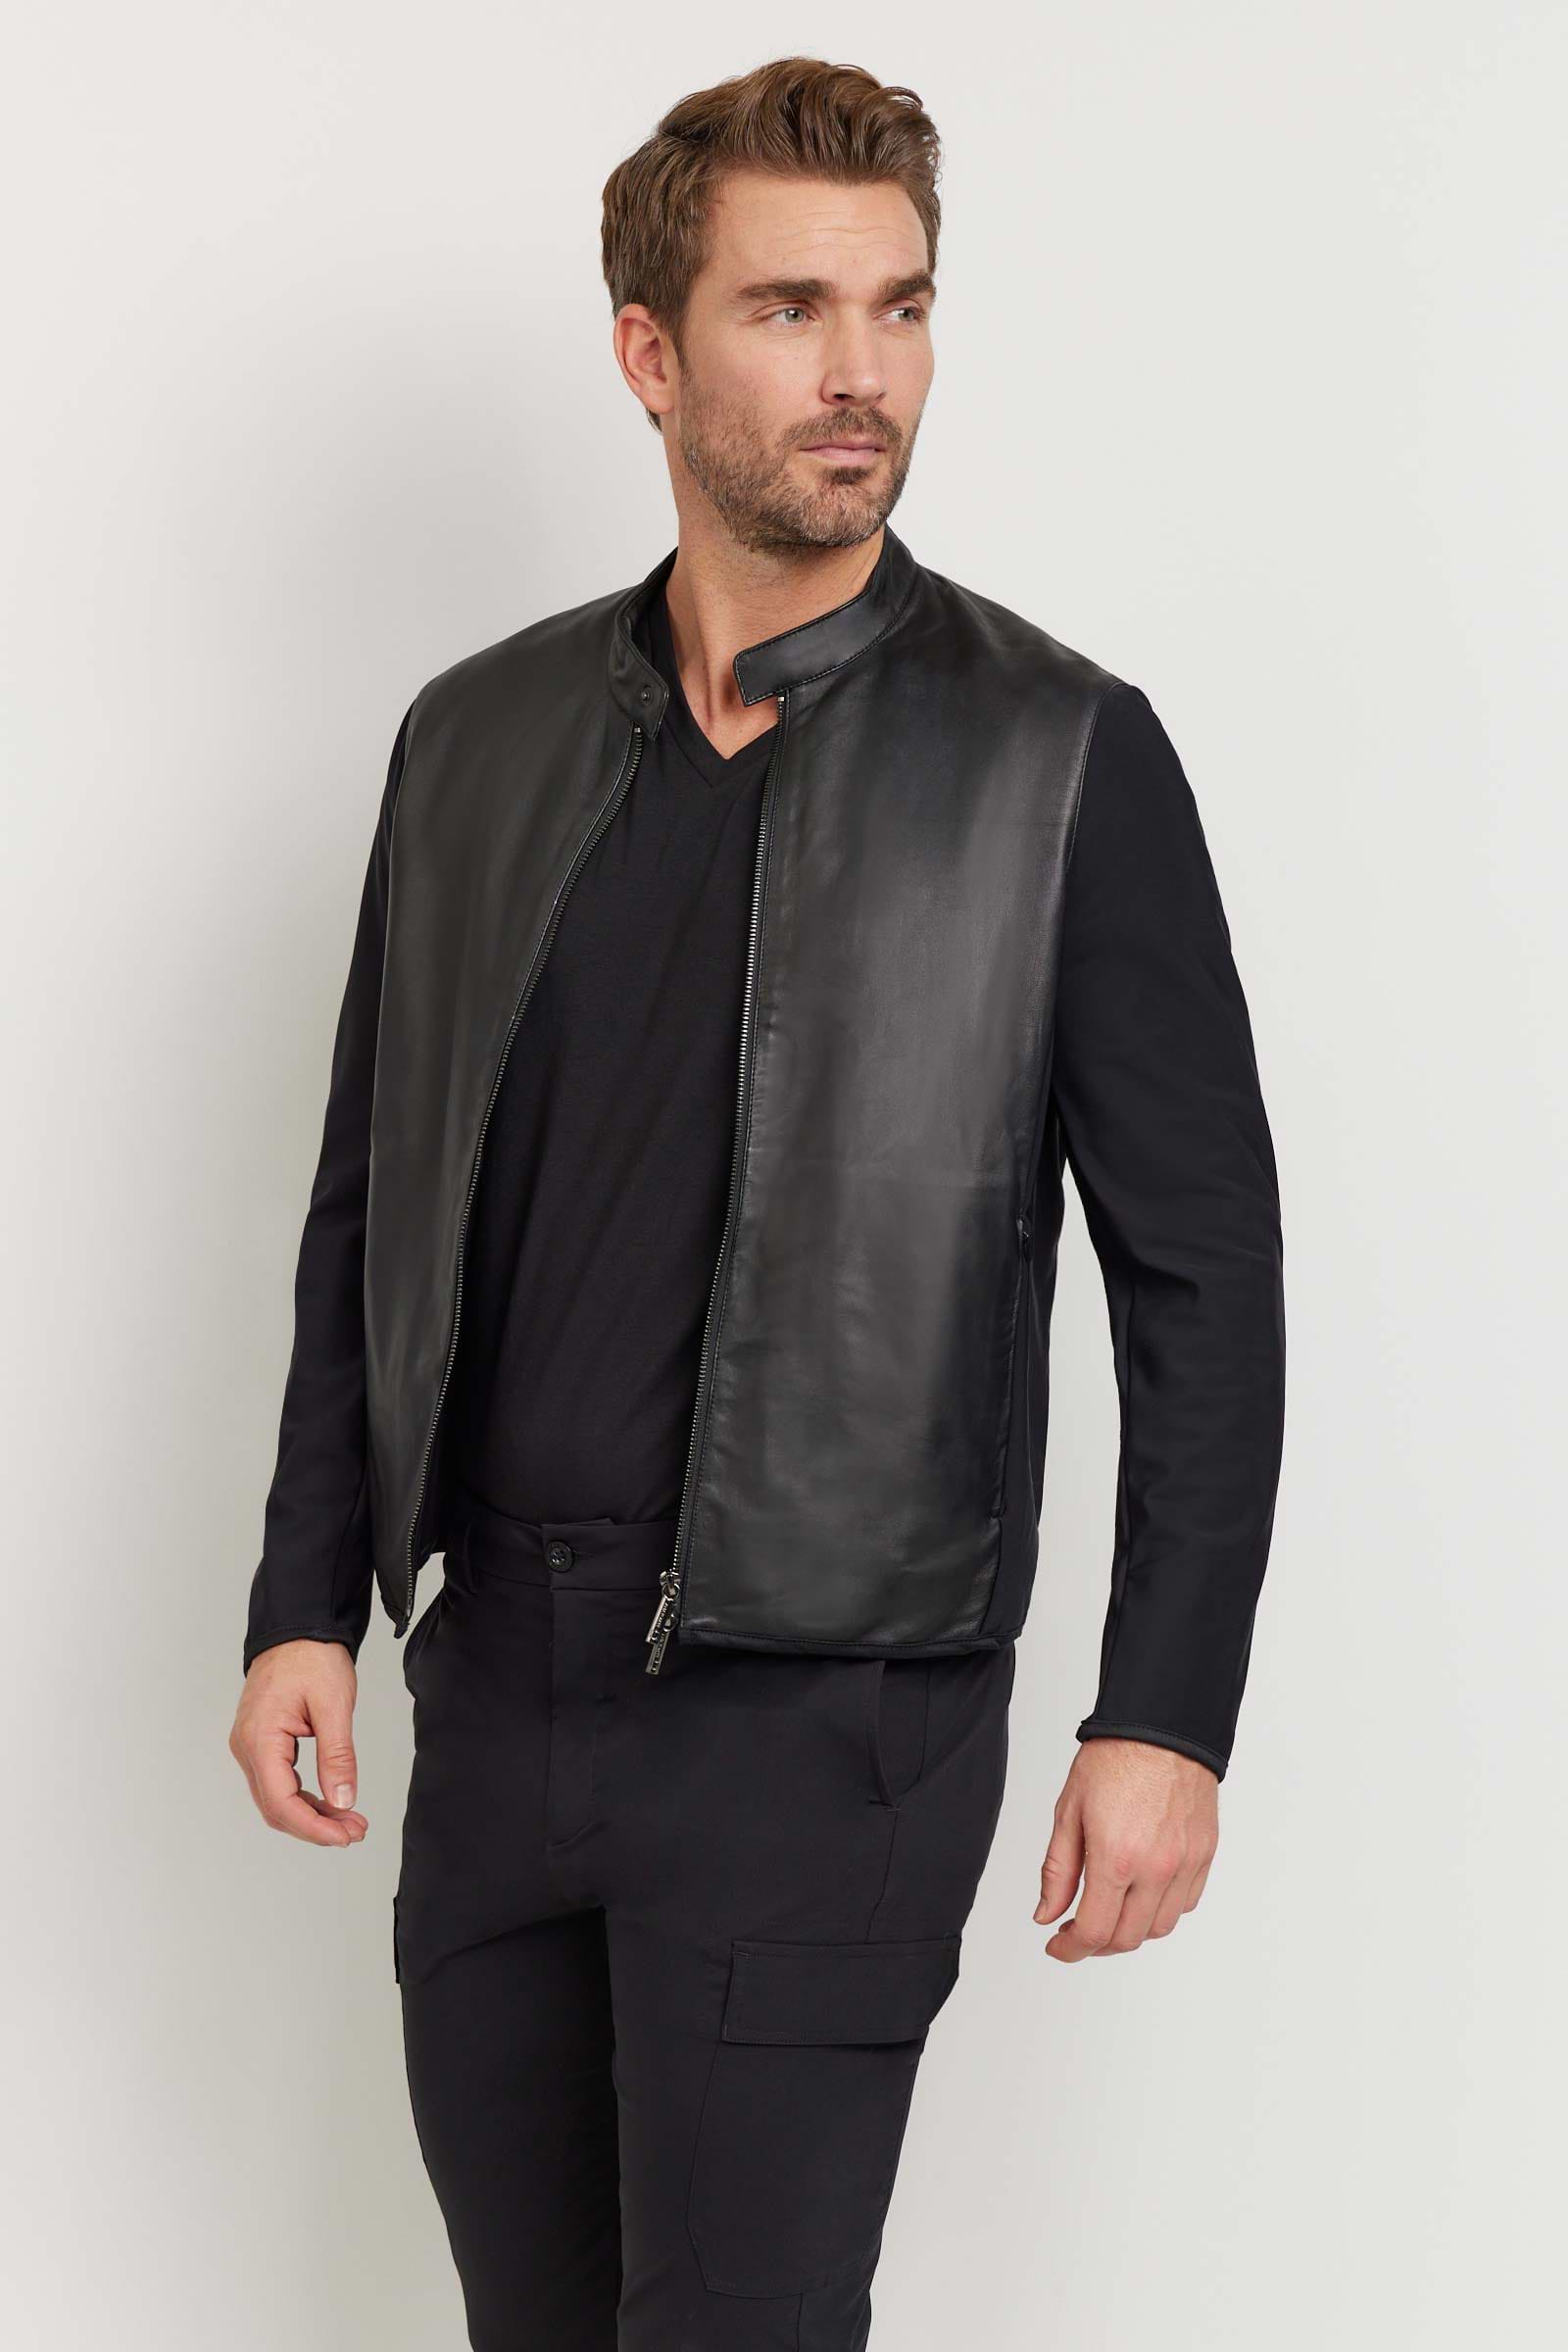 The Best Travel Jacket. Man Showing the Side Profile of a Men's Joey Leather Jacket in Black.